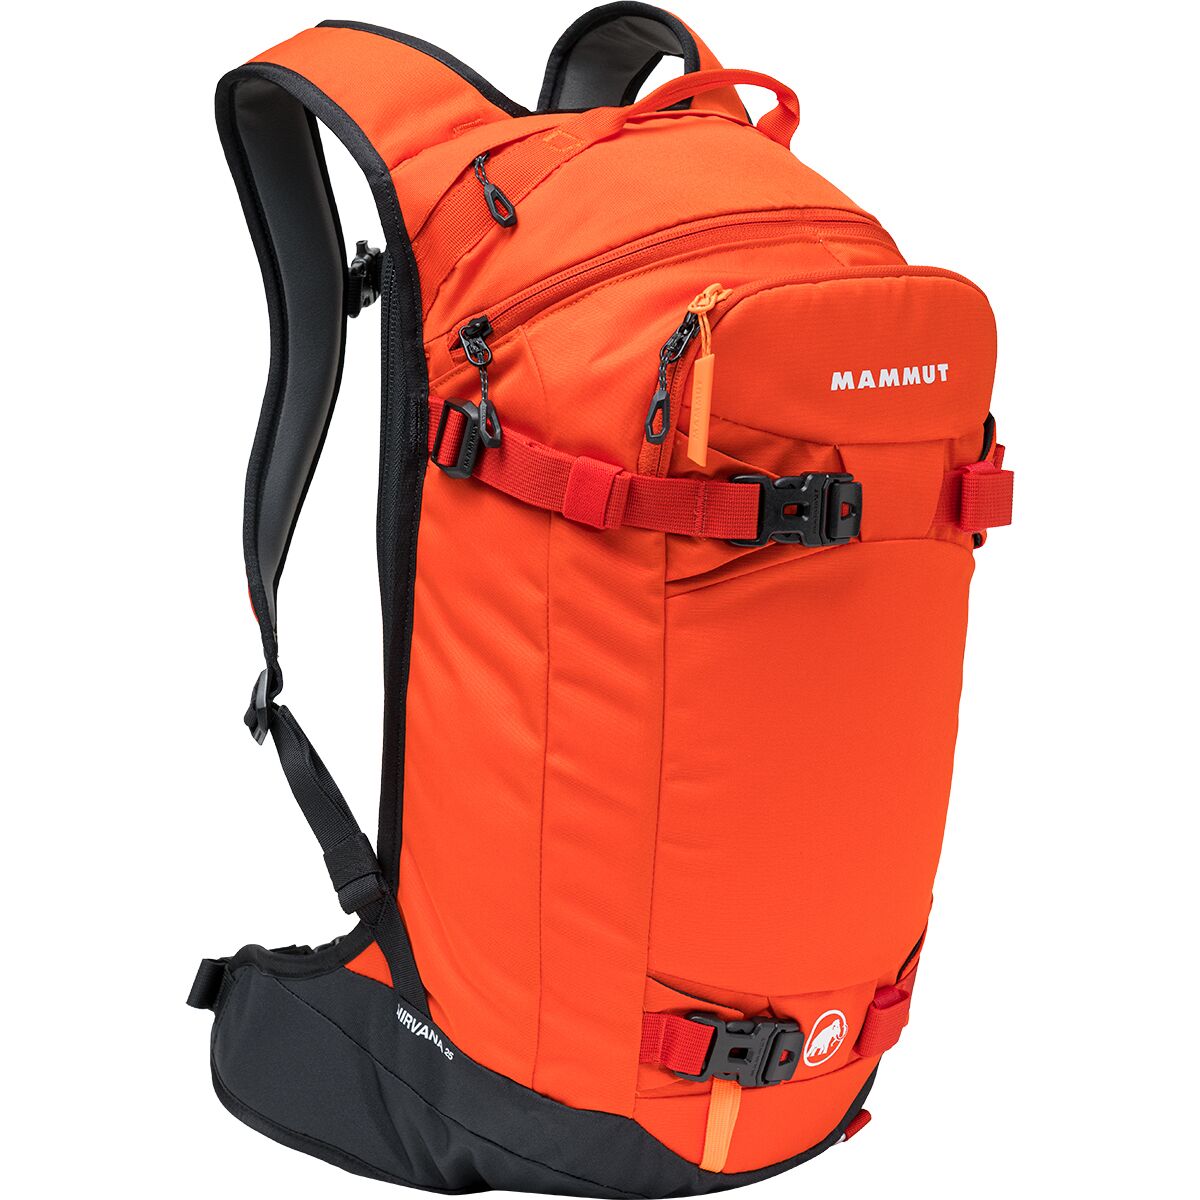 Montgomery Regeneratief In Nirvana 25L Backpack by Mammut | US-Parks.com